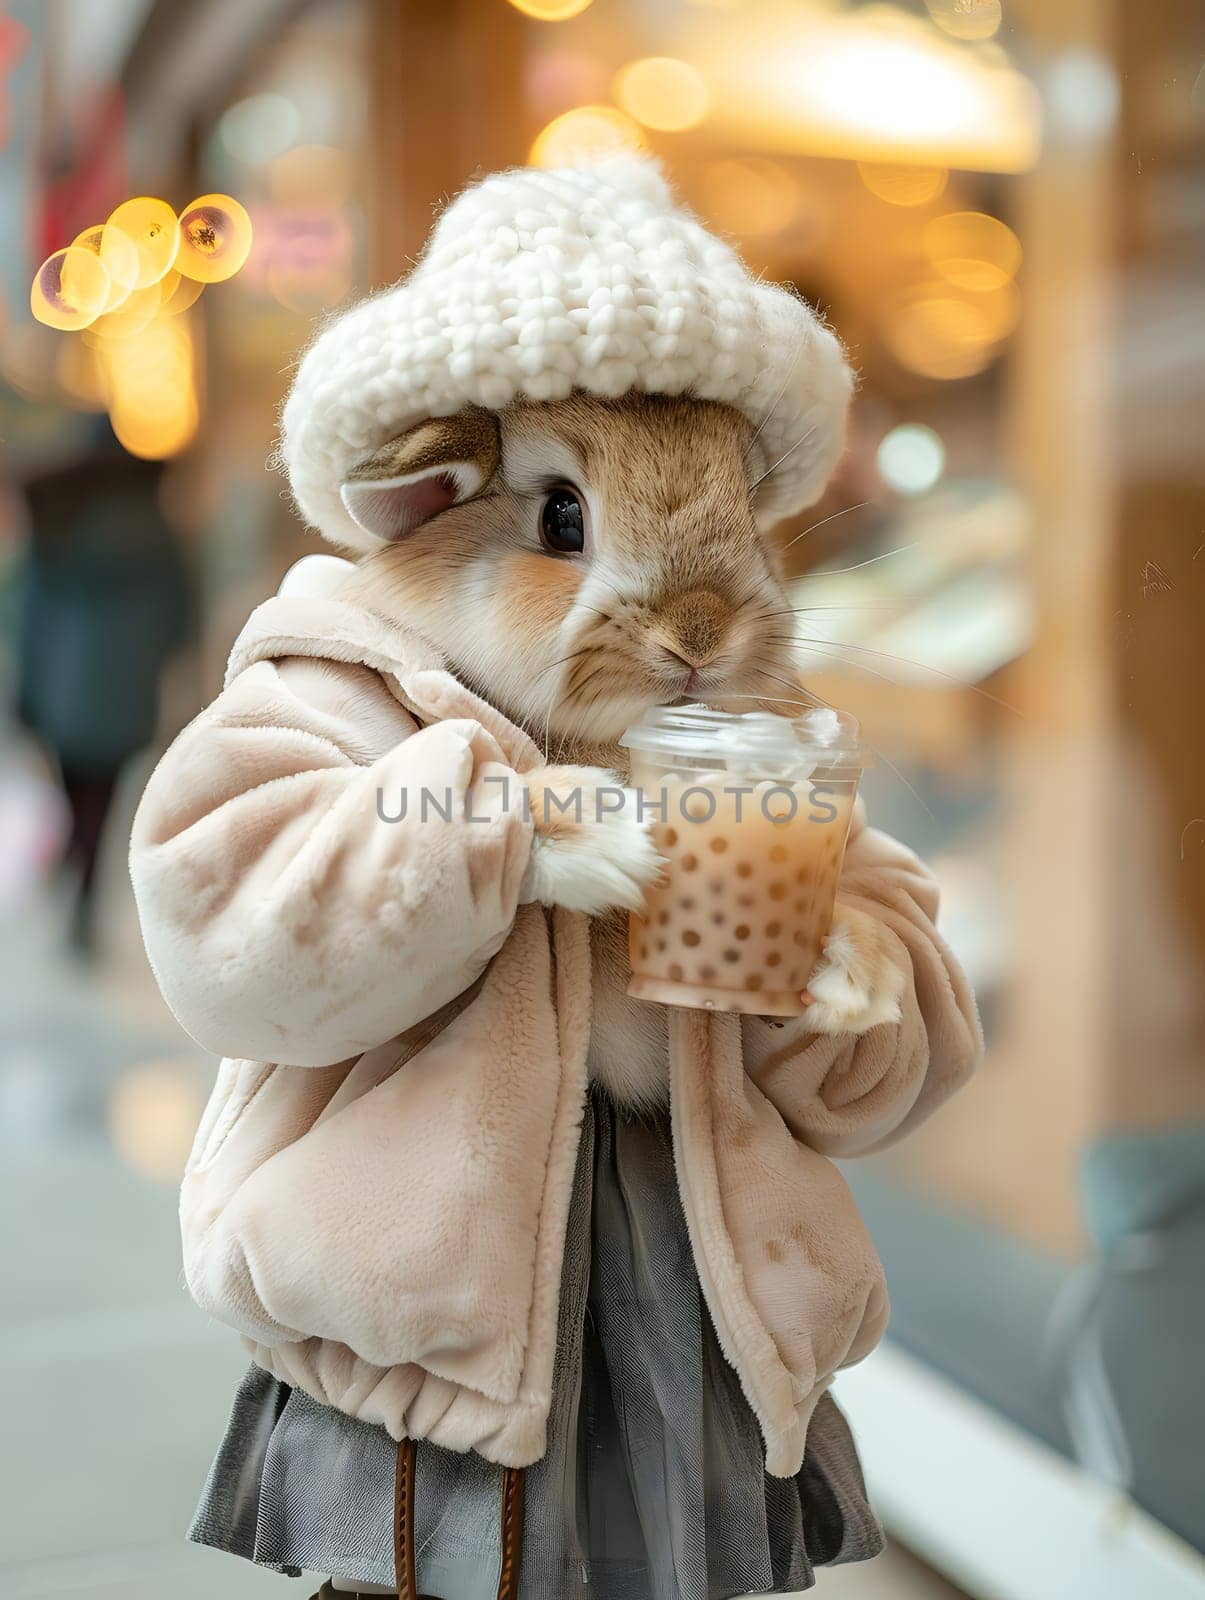 Fur clothing rabbit enjoys bubble tea in winter attire by Nadtochiy